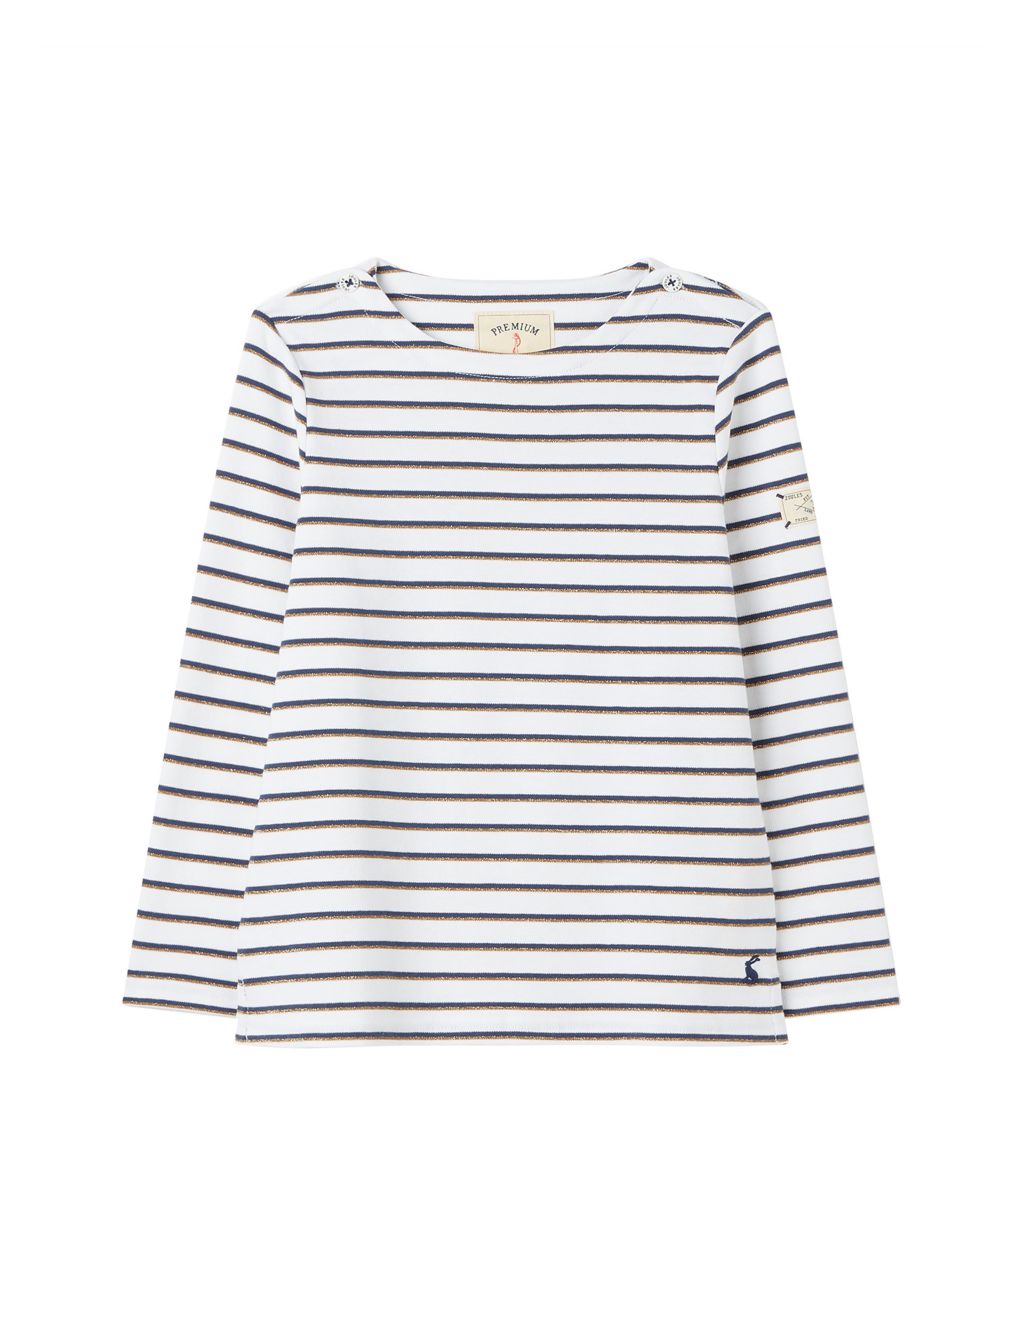 Pure Cotton Striped Top (2-12 Yrs) image 1